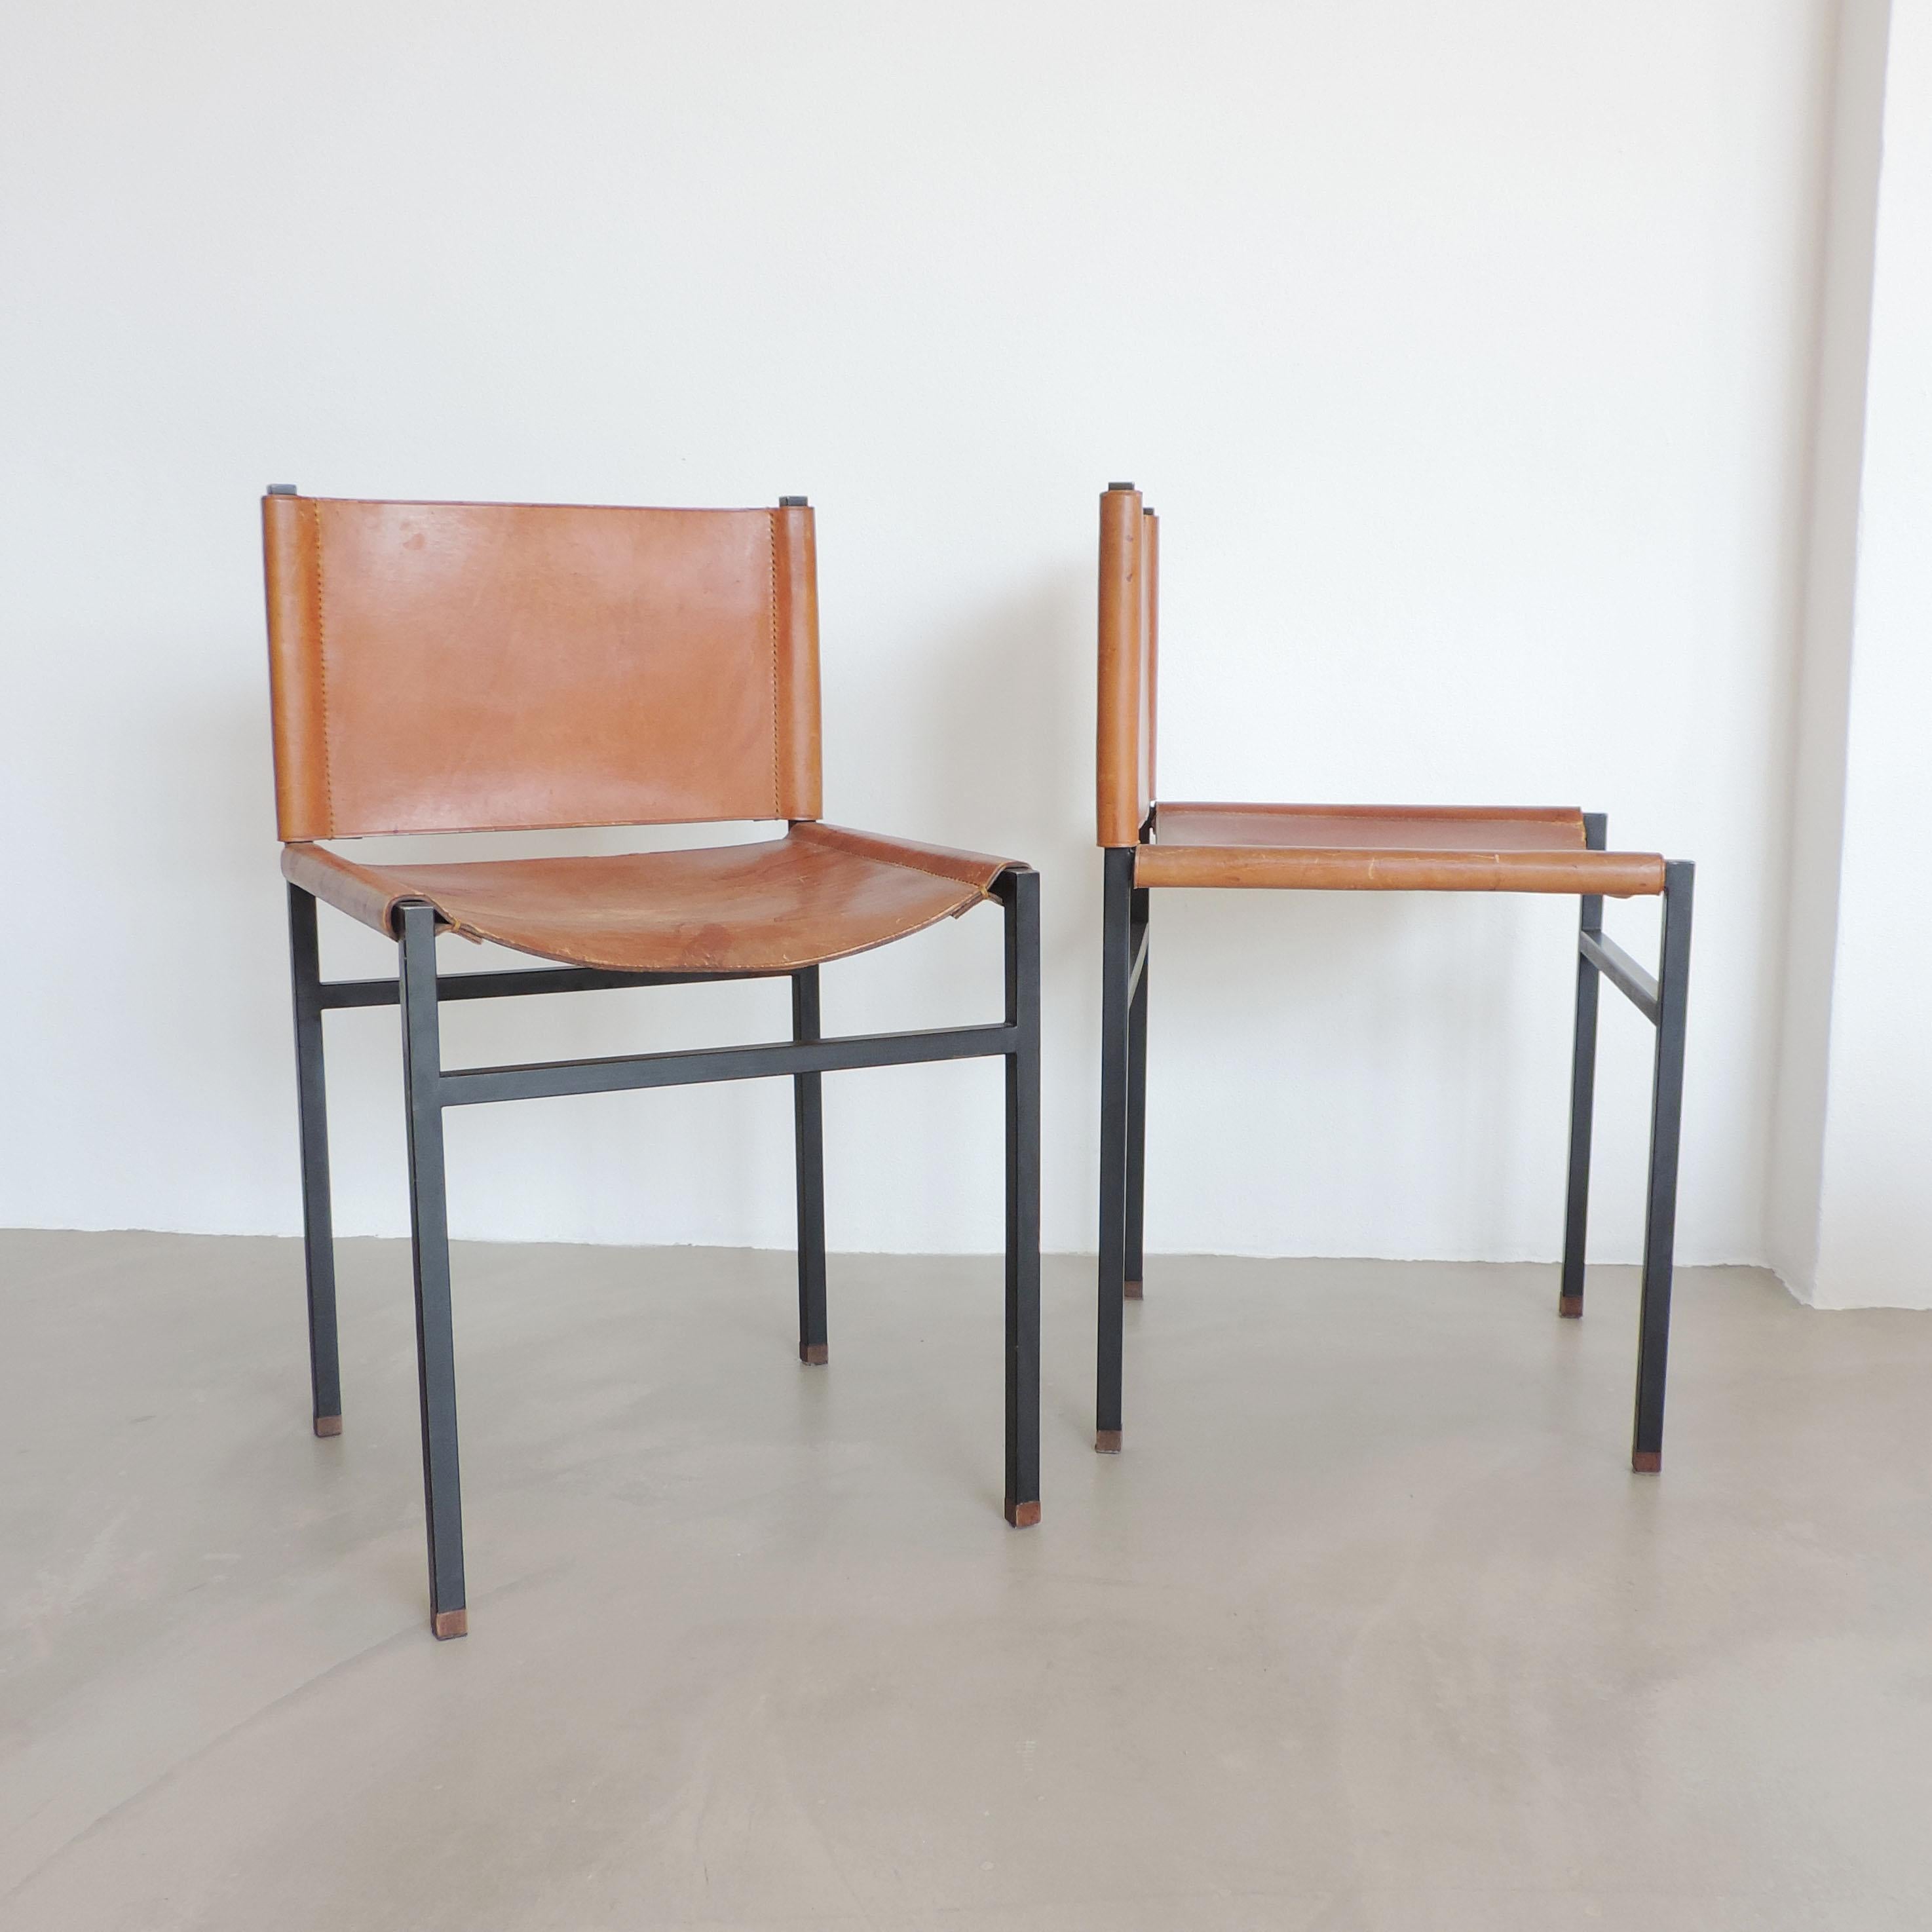 Mid-20th Century Six Paolo Tilche Dining Chairs in Leather and Metal for Arform, Italy 1960s